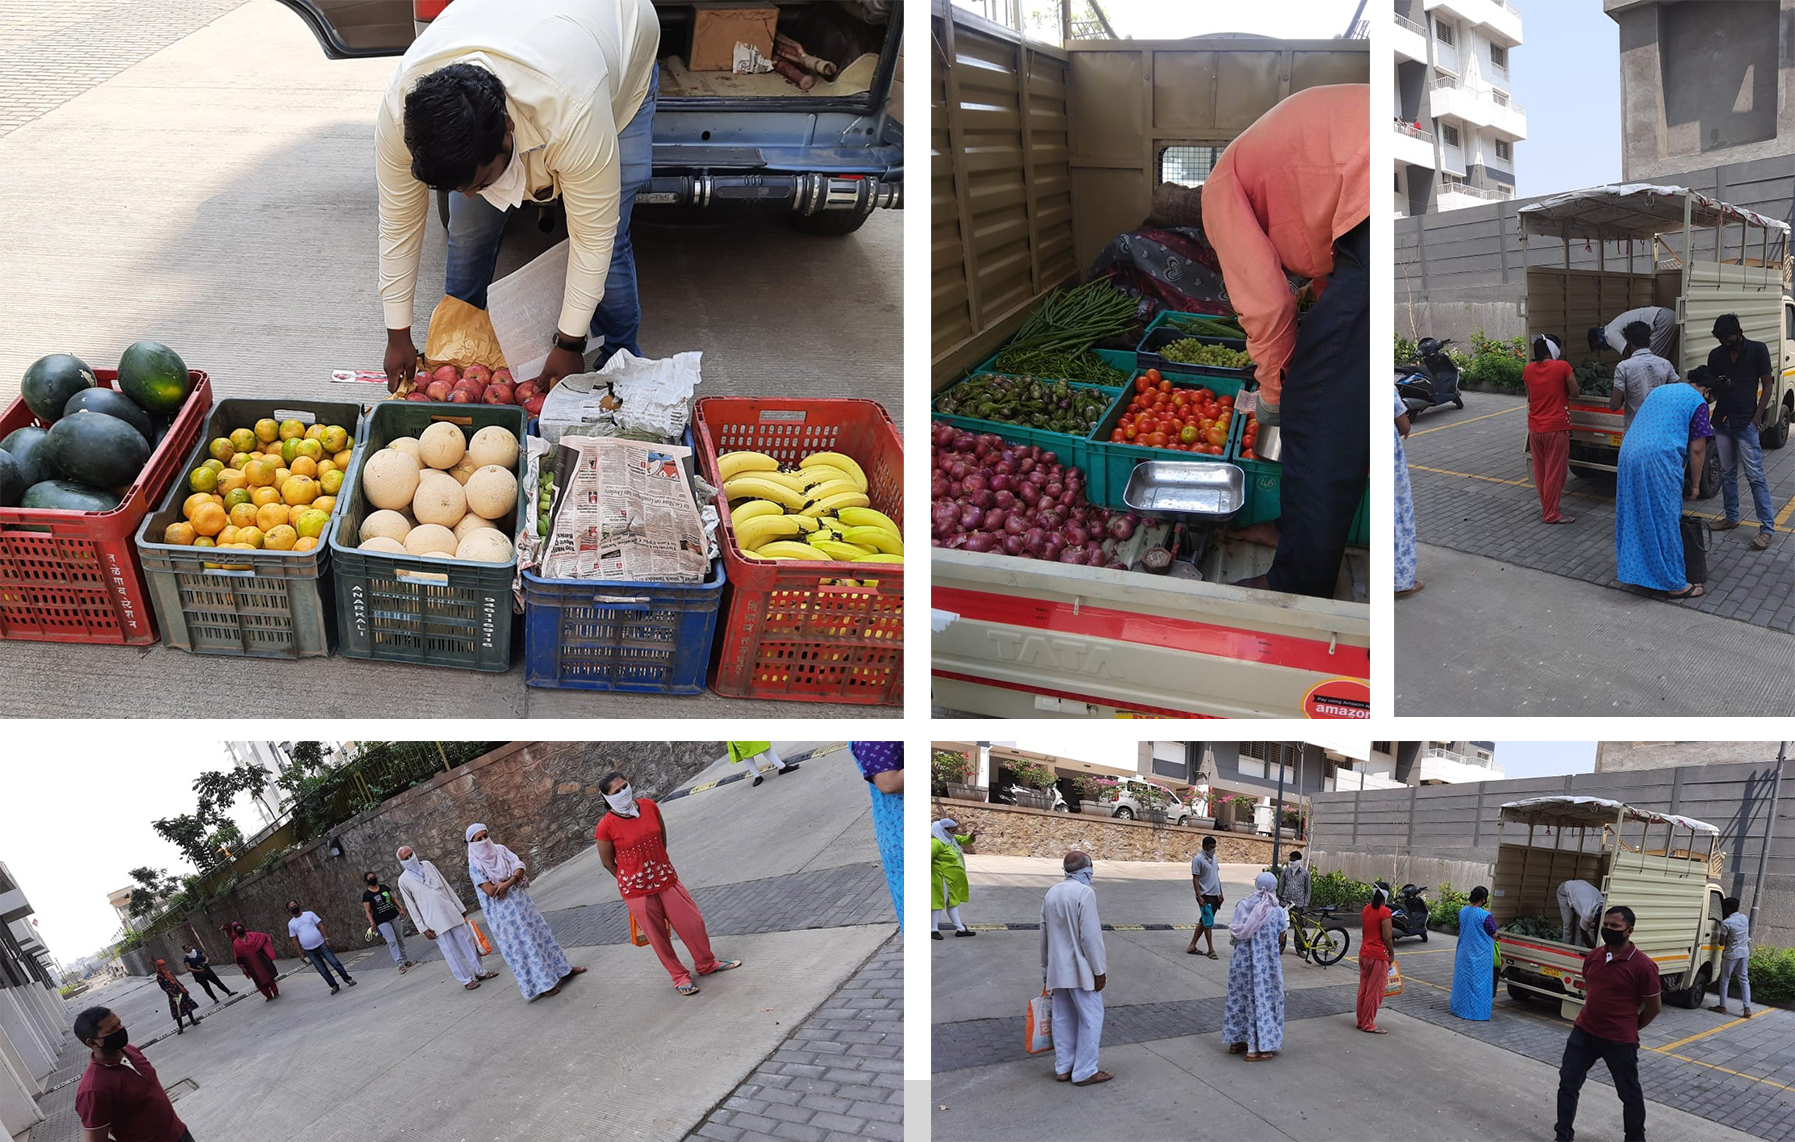 A local vegetable vendor has also been arranged to help residents with vegetables and fruits.